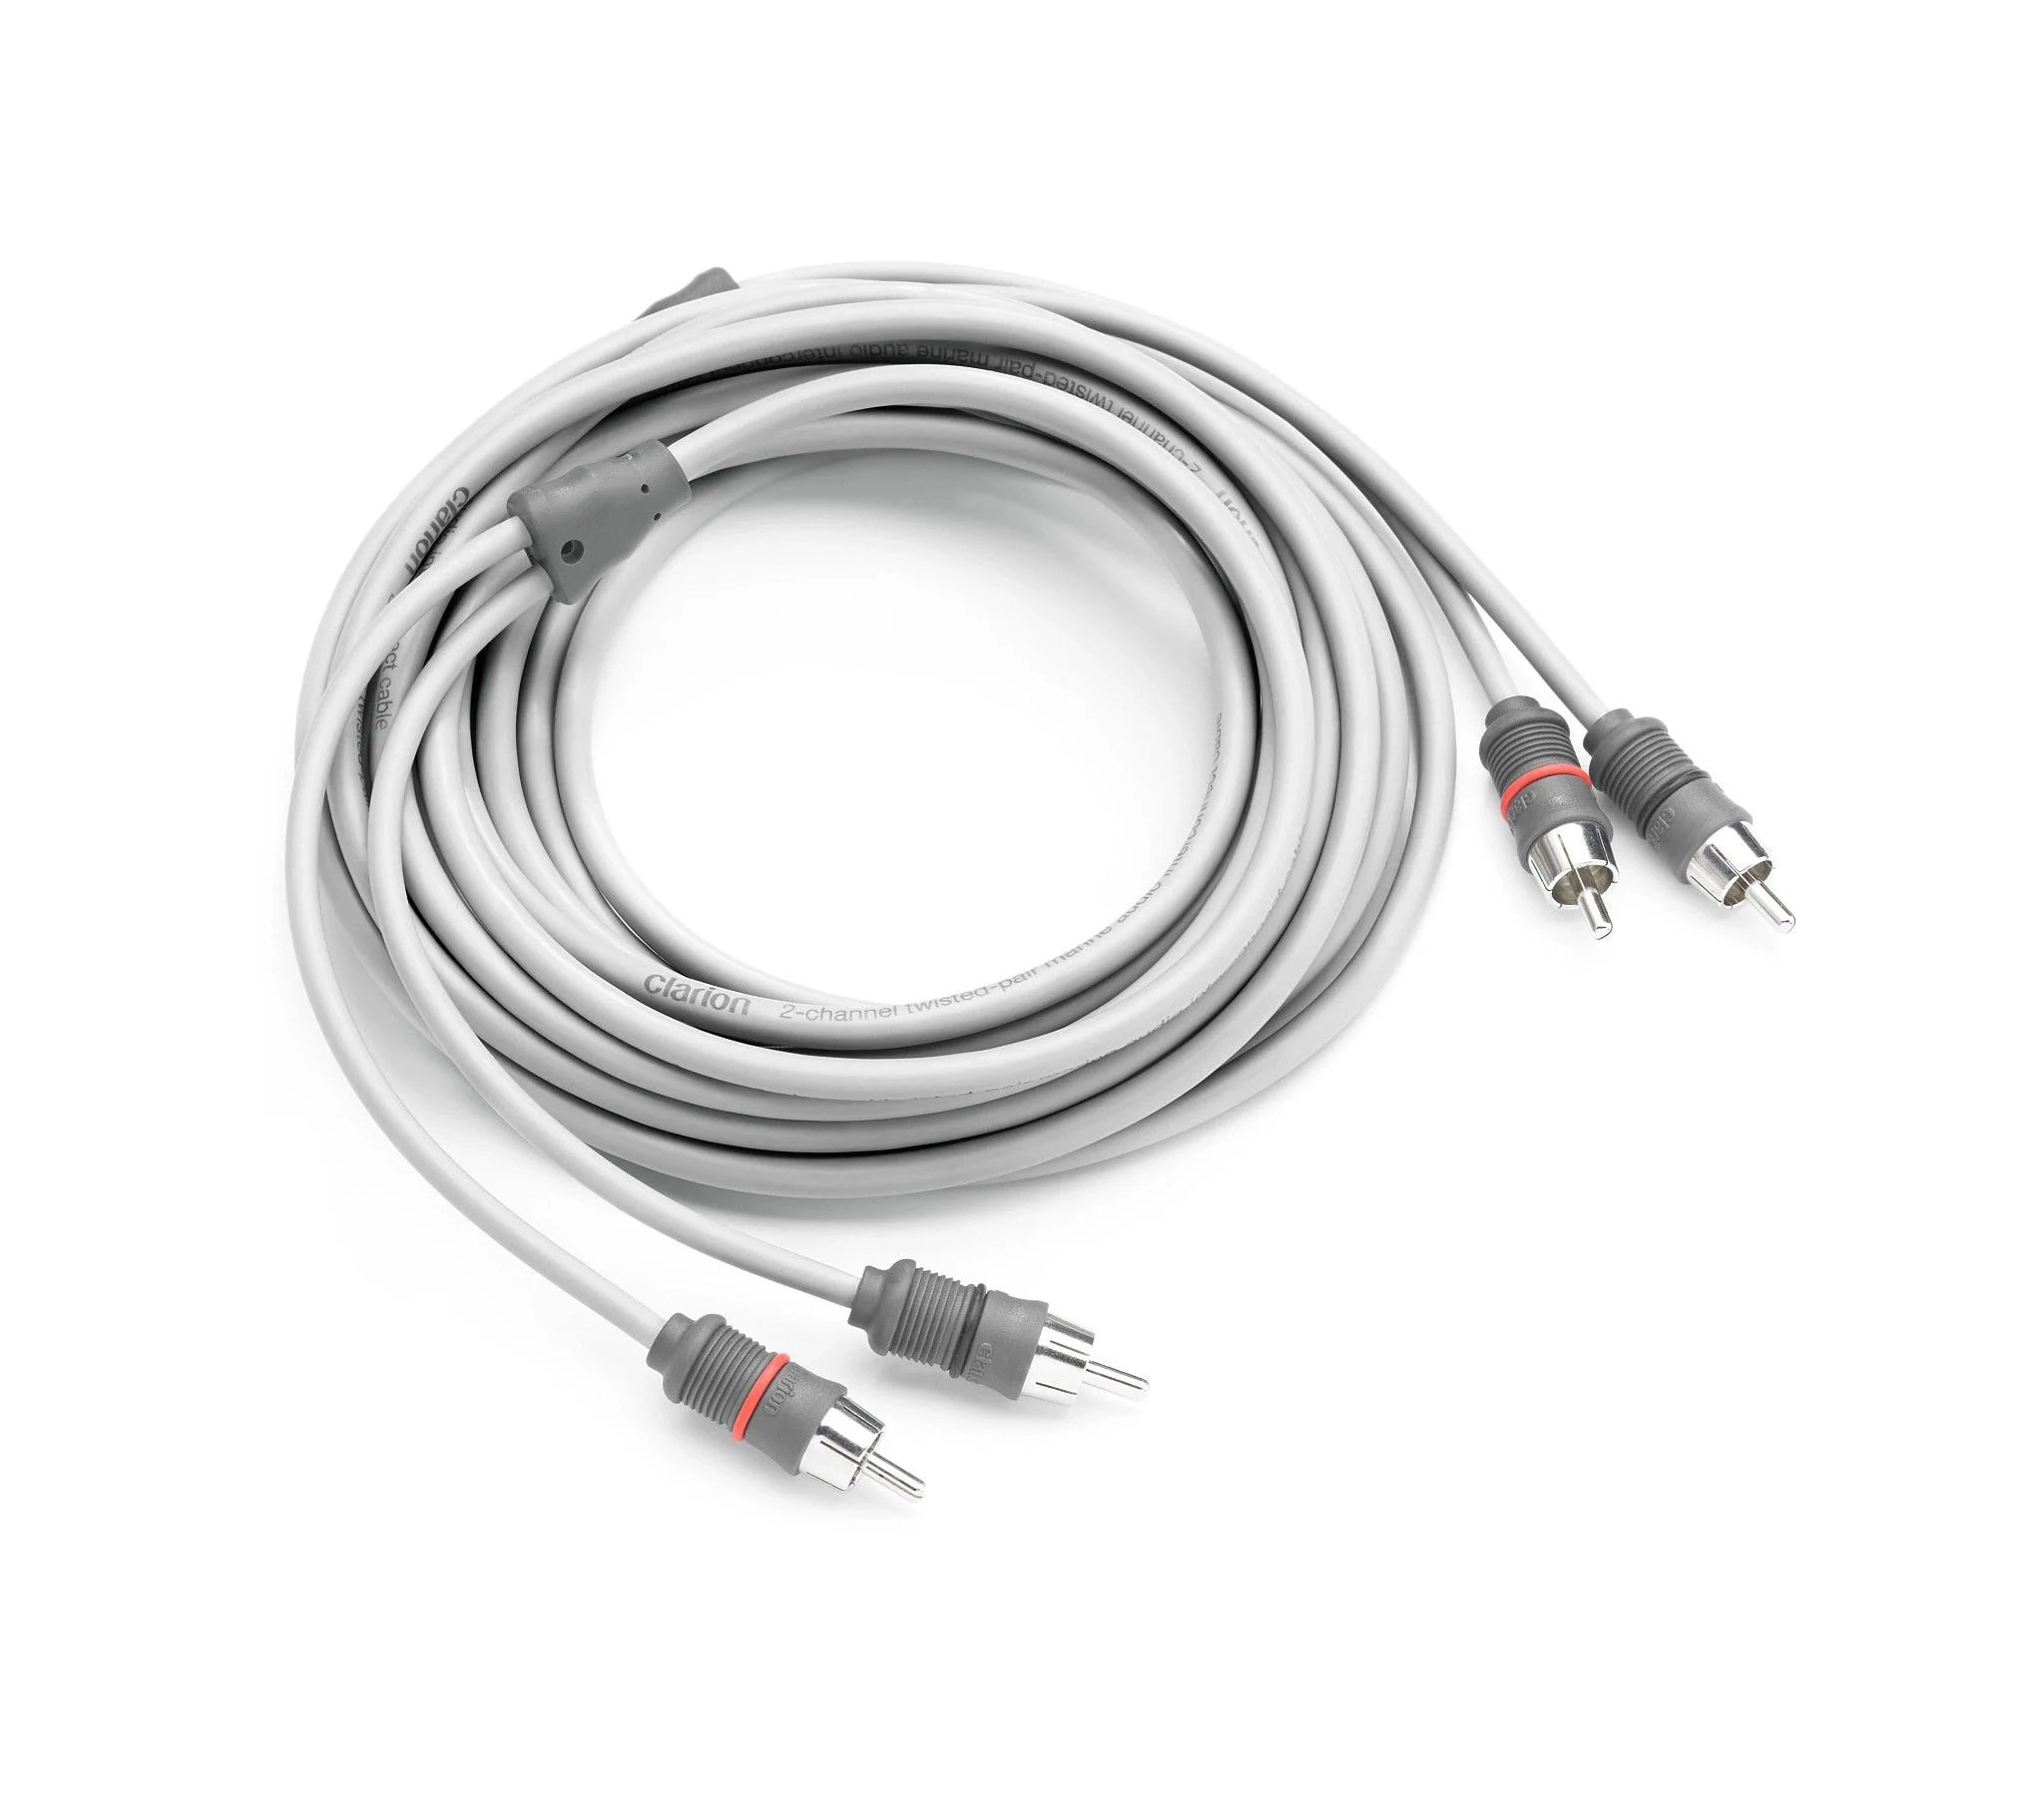 Cable audio interconnect 18ft 2 CH twisted pair RCA with brass connectors